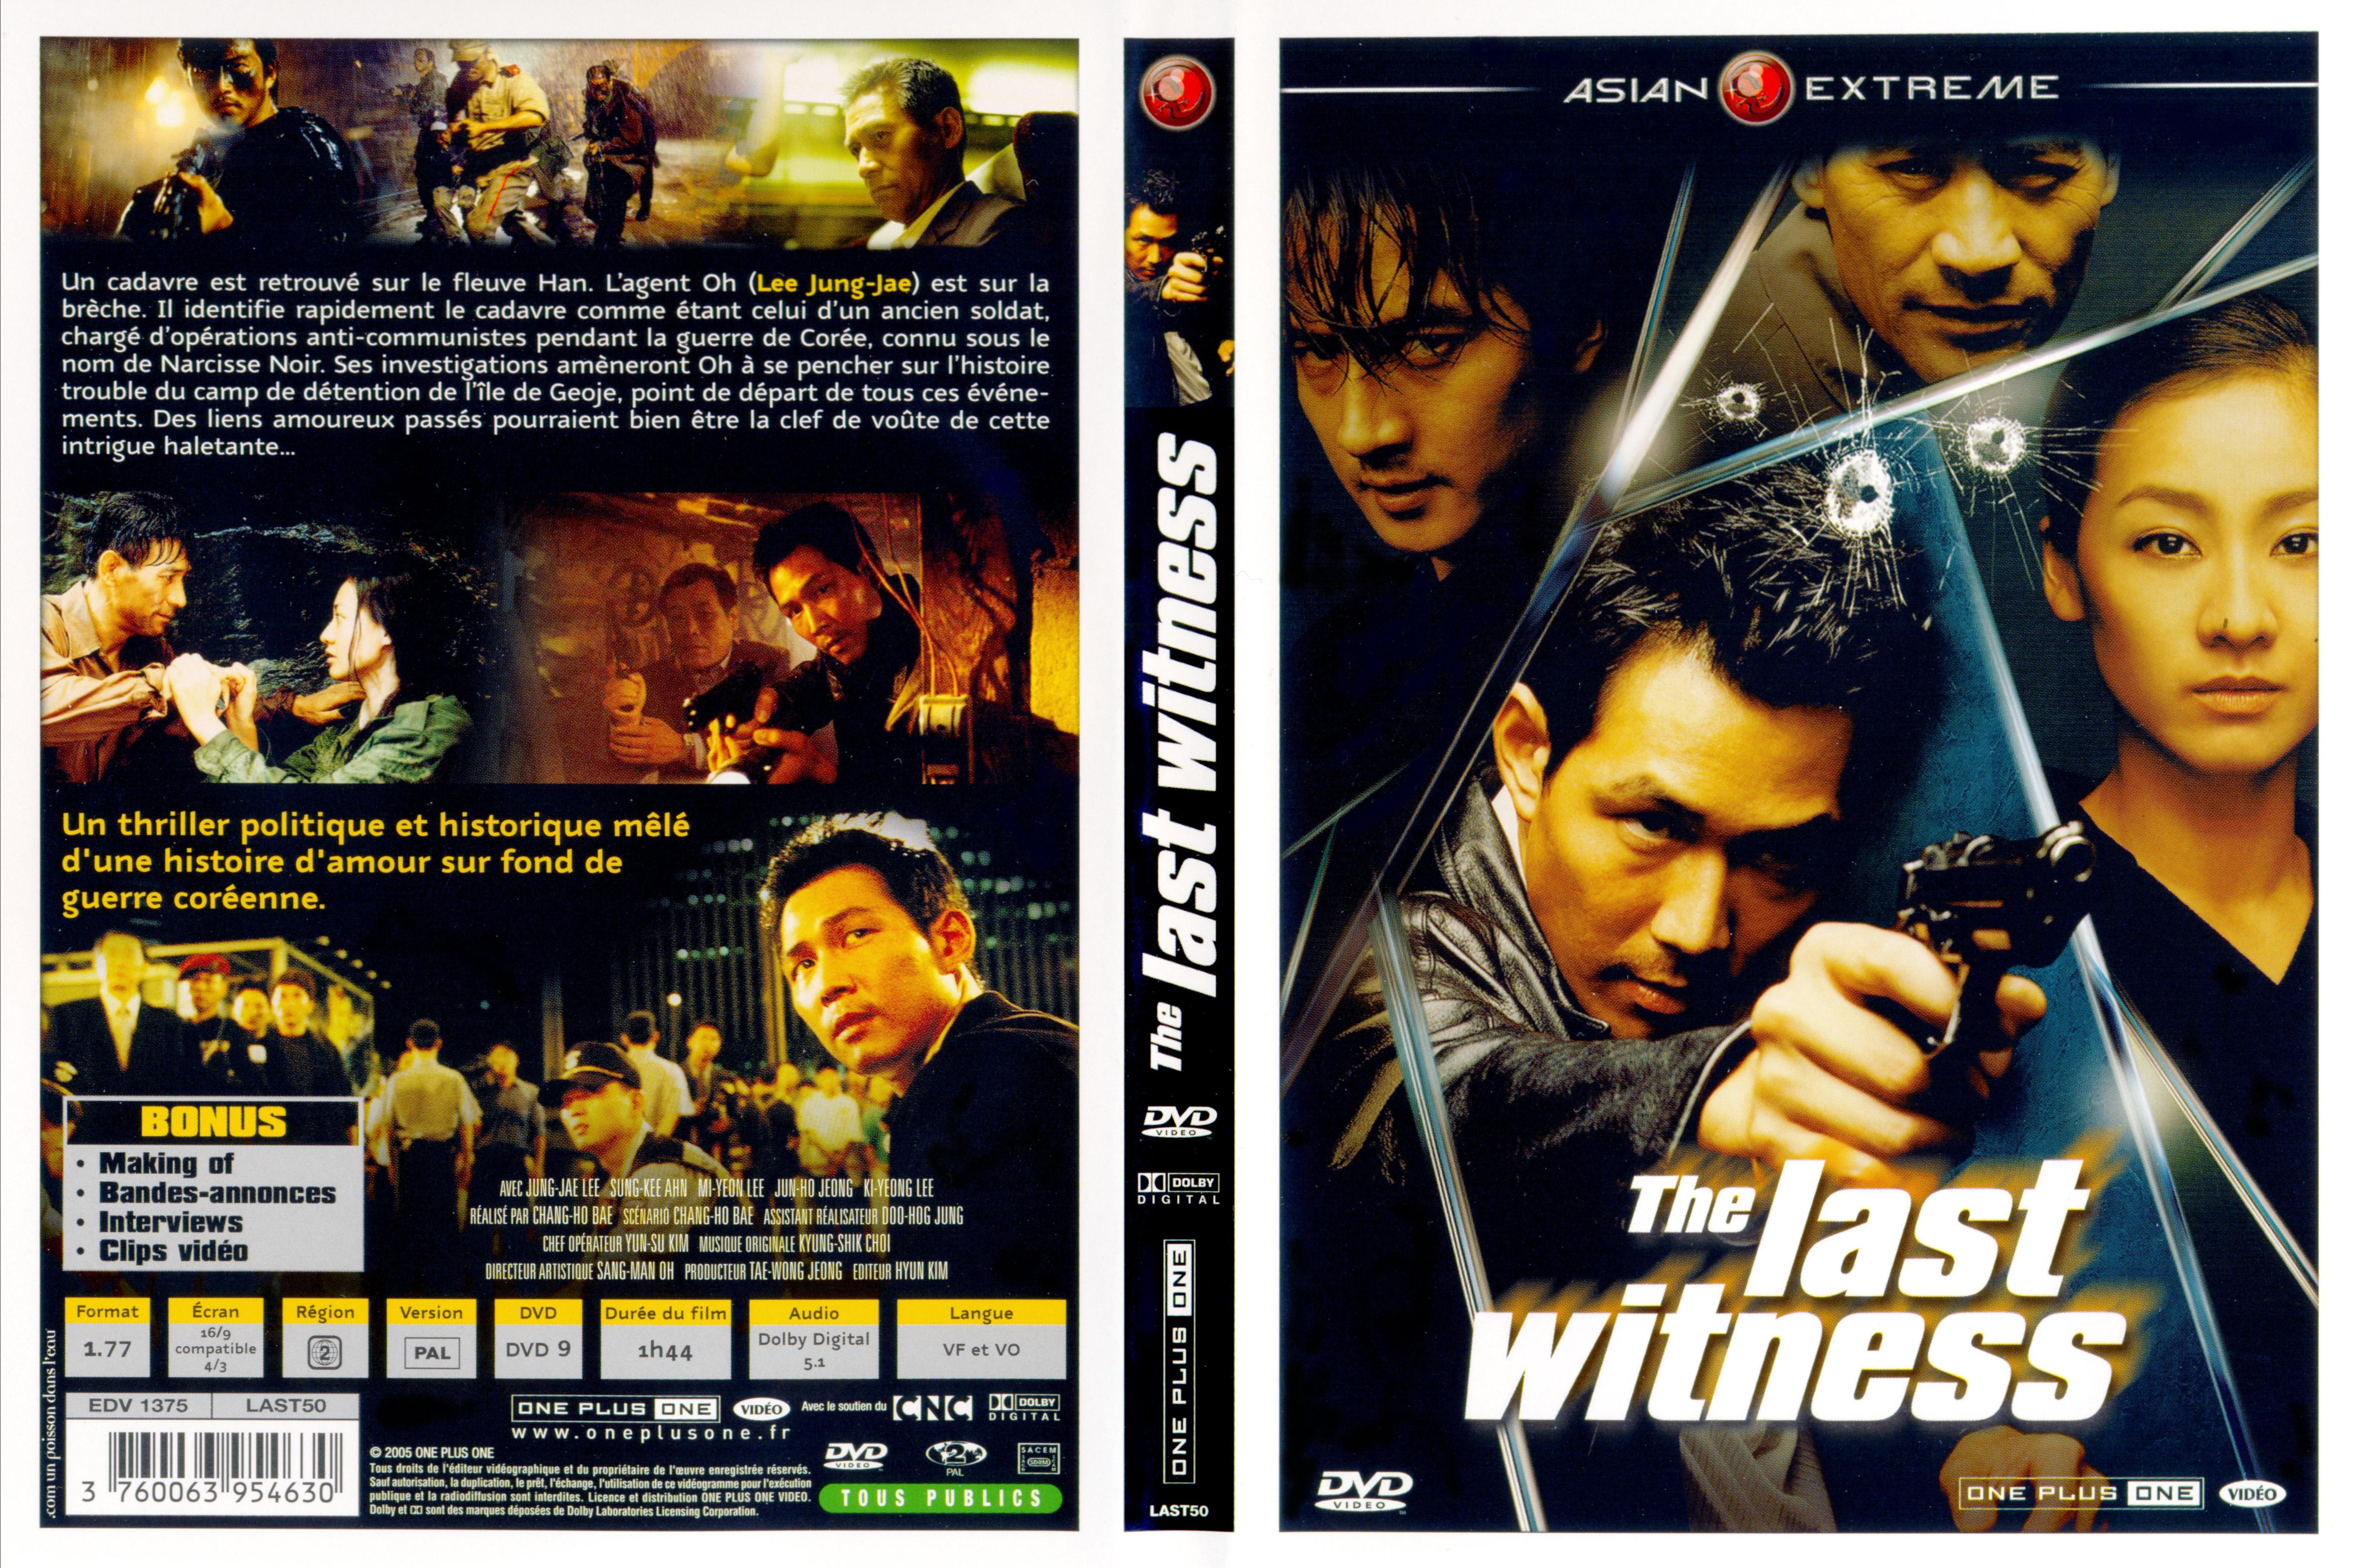 Jaquette DVD The last witness